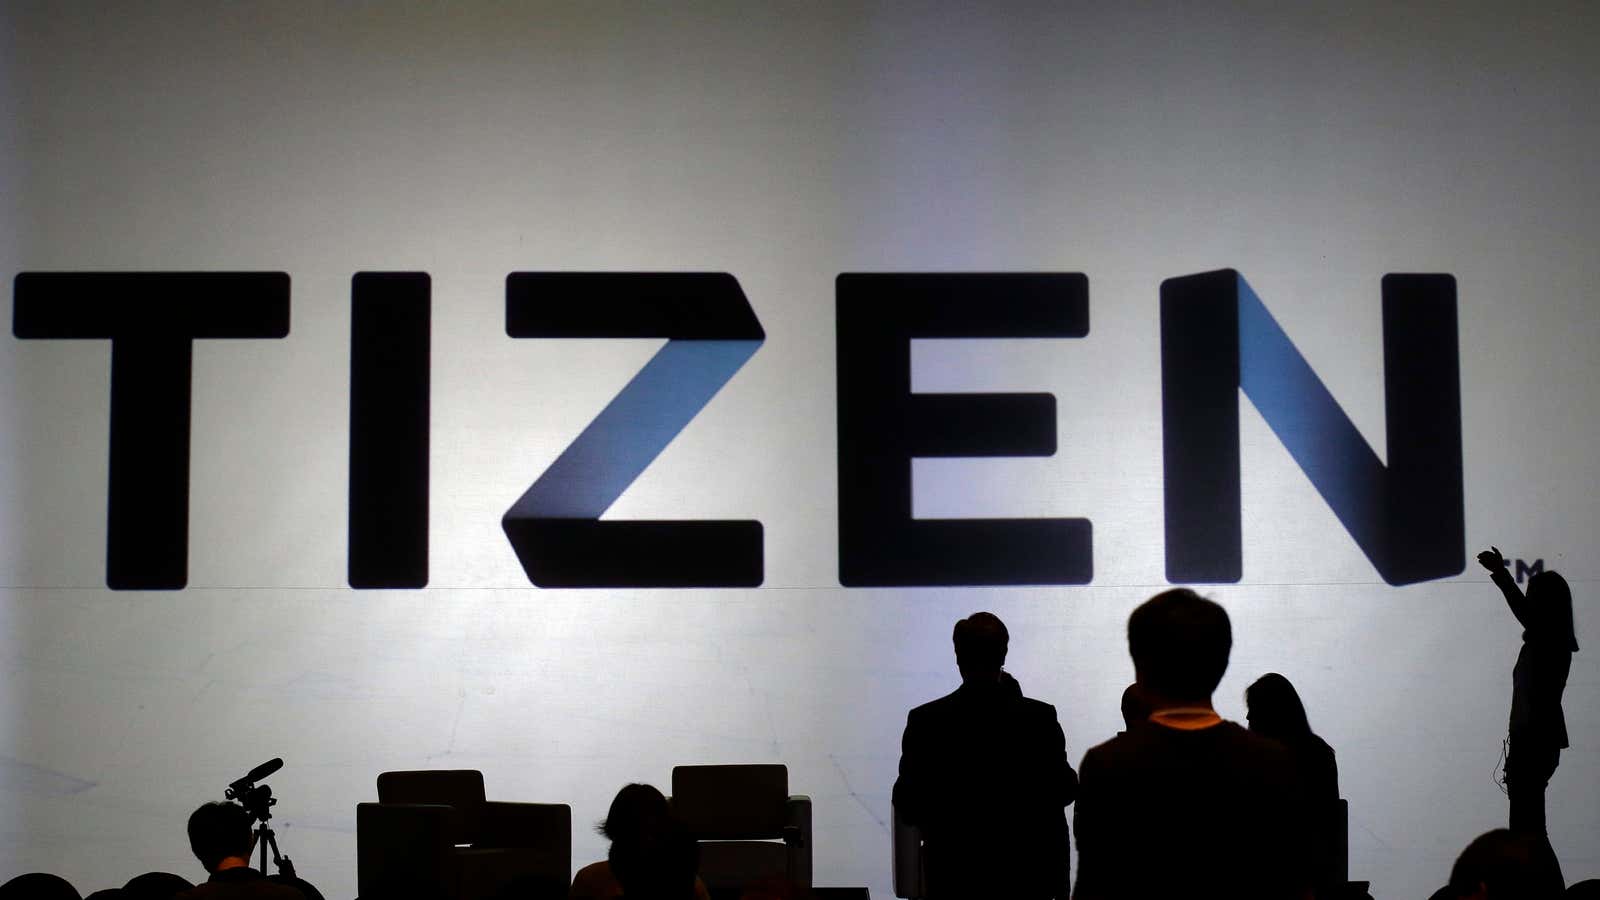 Rumor is that Samsung is switching the Gear from Android to Tizen.